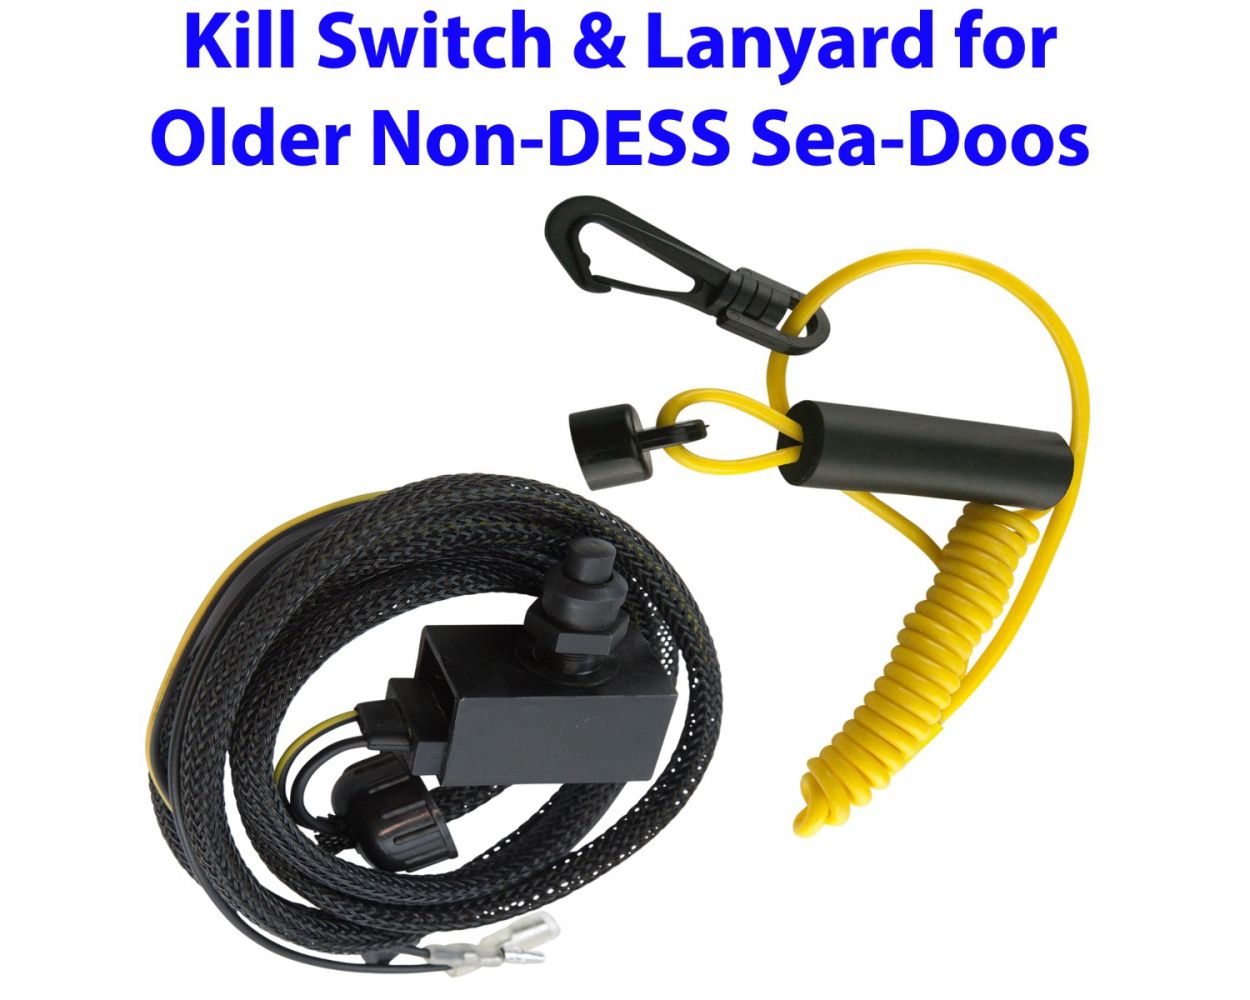 JSP Brand Replaces Sea-Doo XP GTS GTS SP SPX Floating Safety Lanyard Ignition Cap Key Stop Switch 278001431 Non DESS